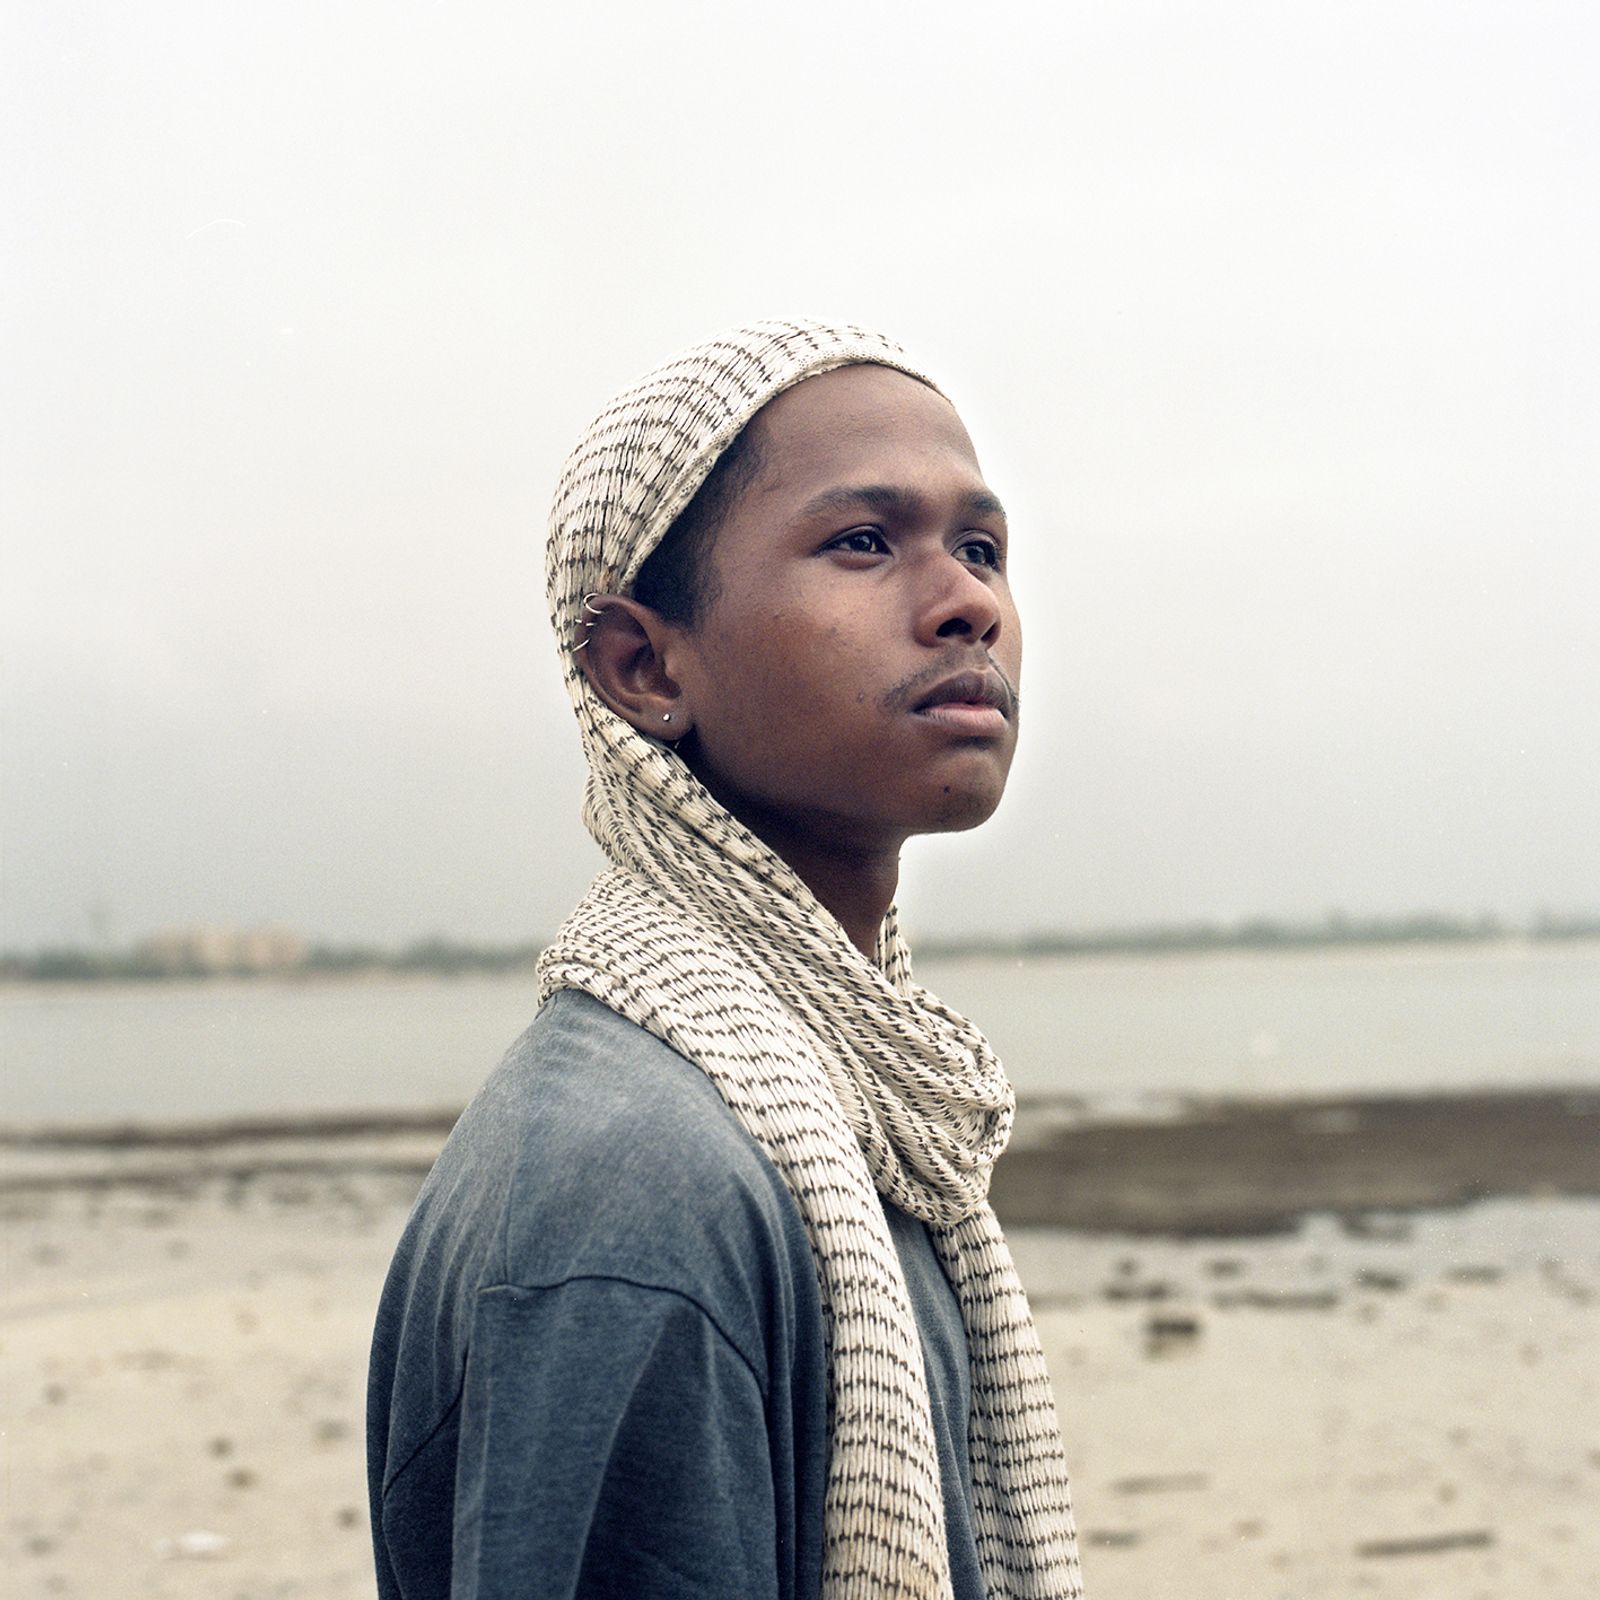 © Linda Bournane Engelberth - Image from the Outside the Binary Africa photography project